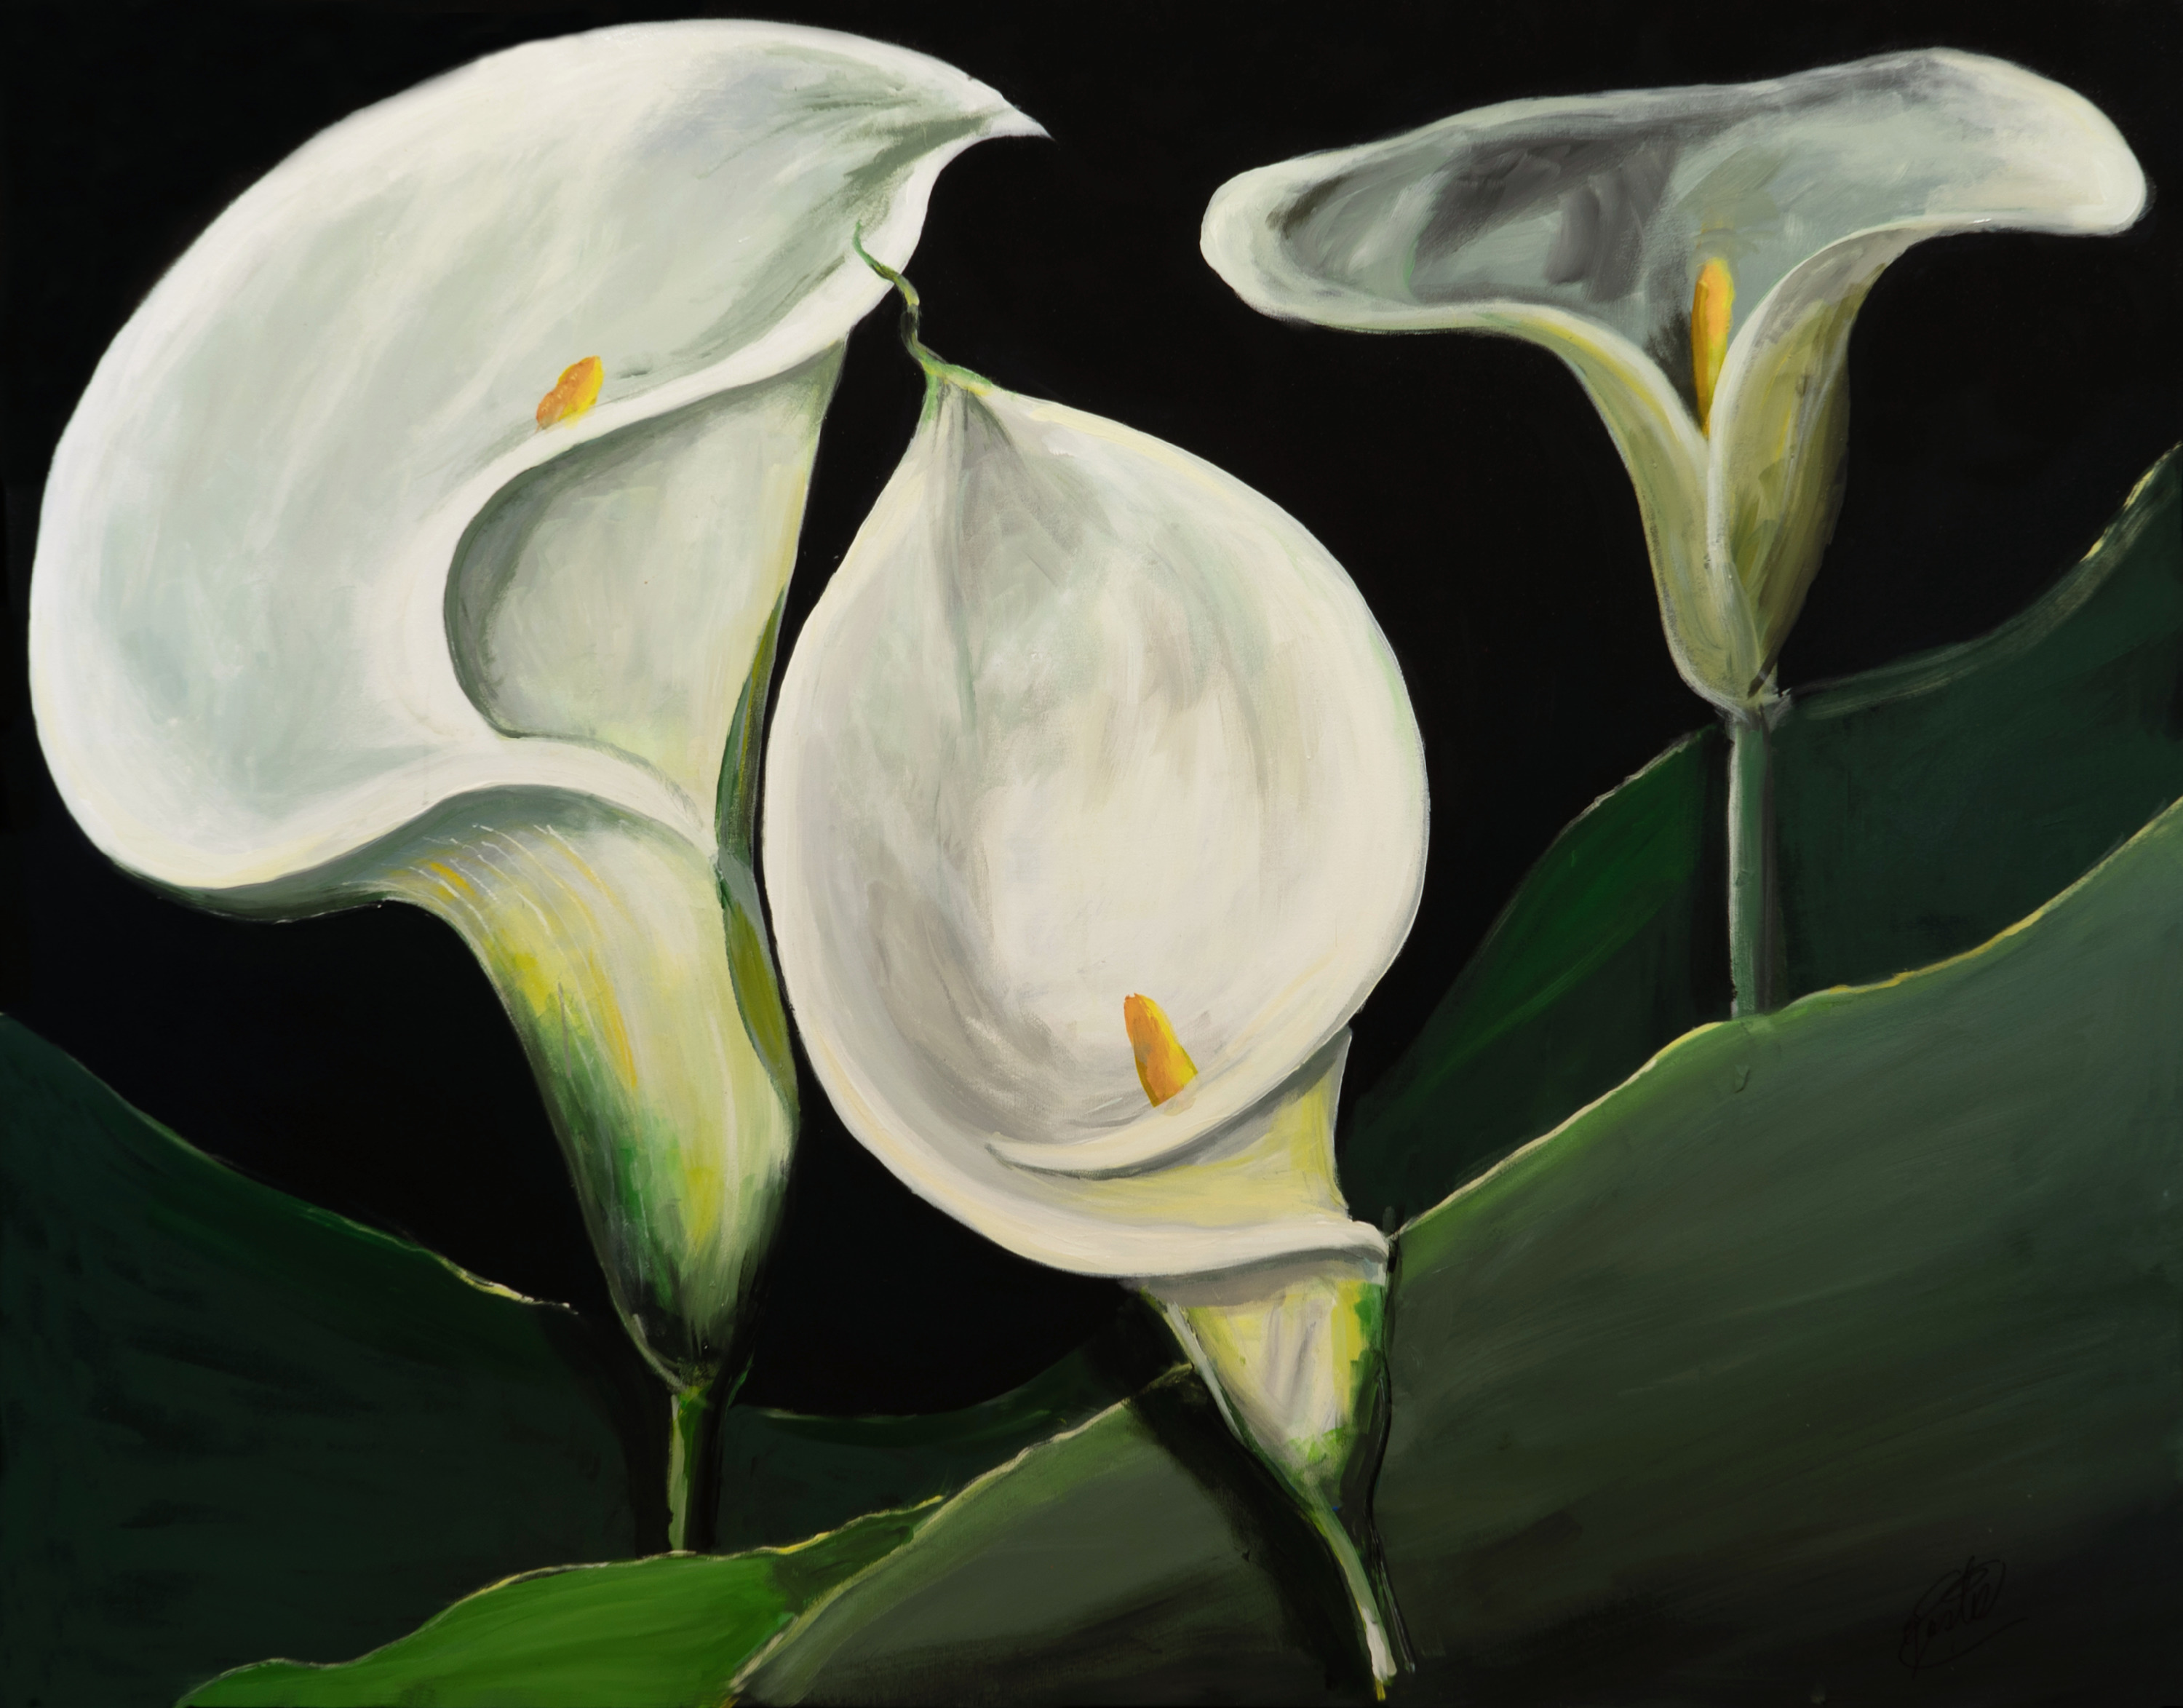 Cala lily in three spdyhg